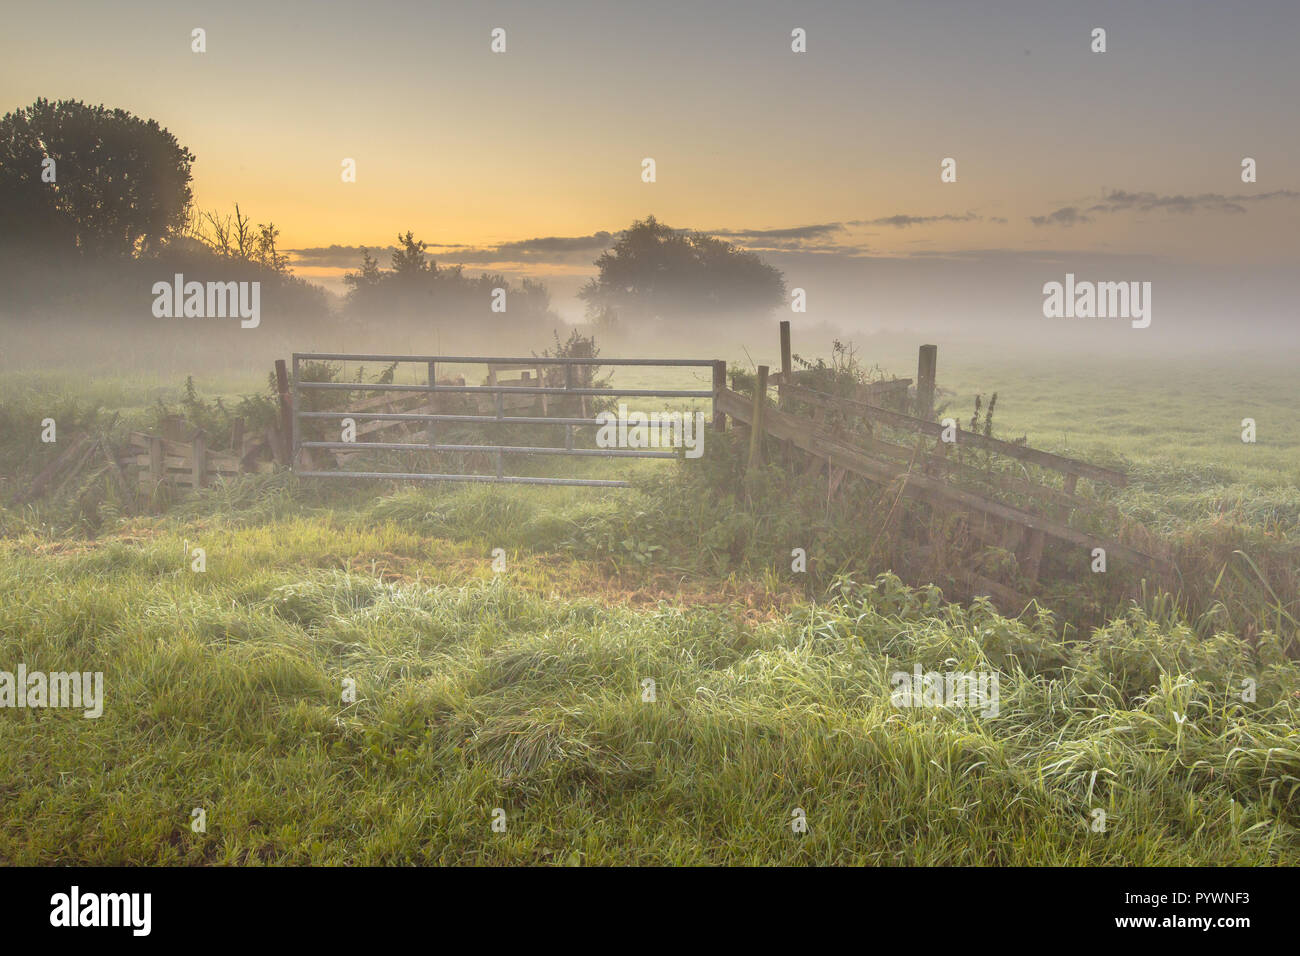 Gate and fences in Foggy farmland during sunrise in september, Drenthe Netherlands Stock Photo